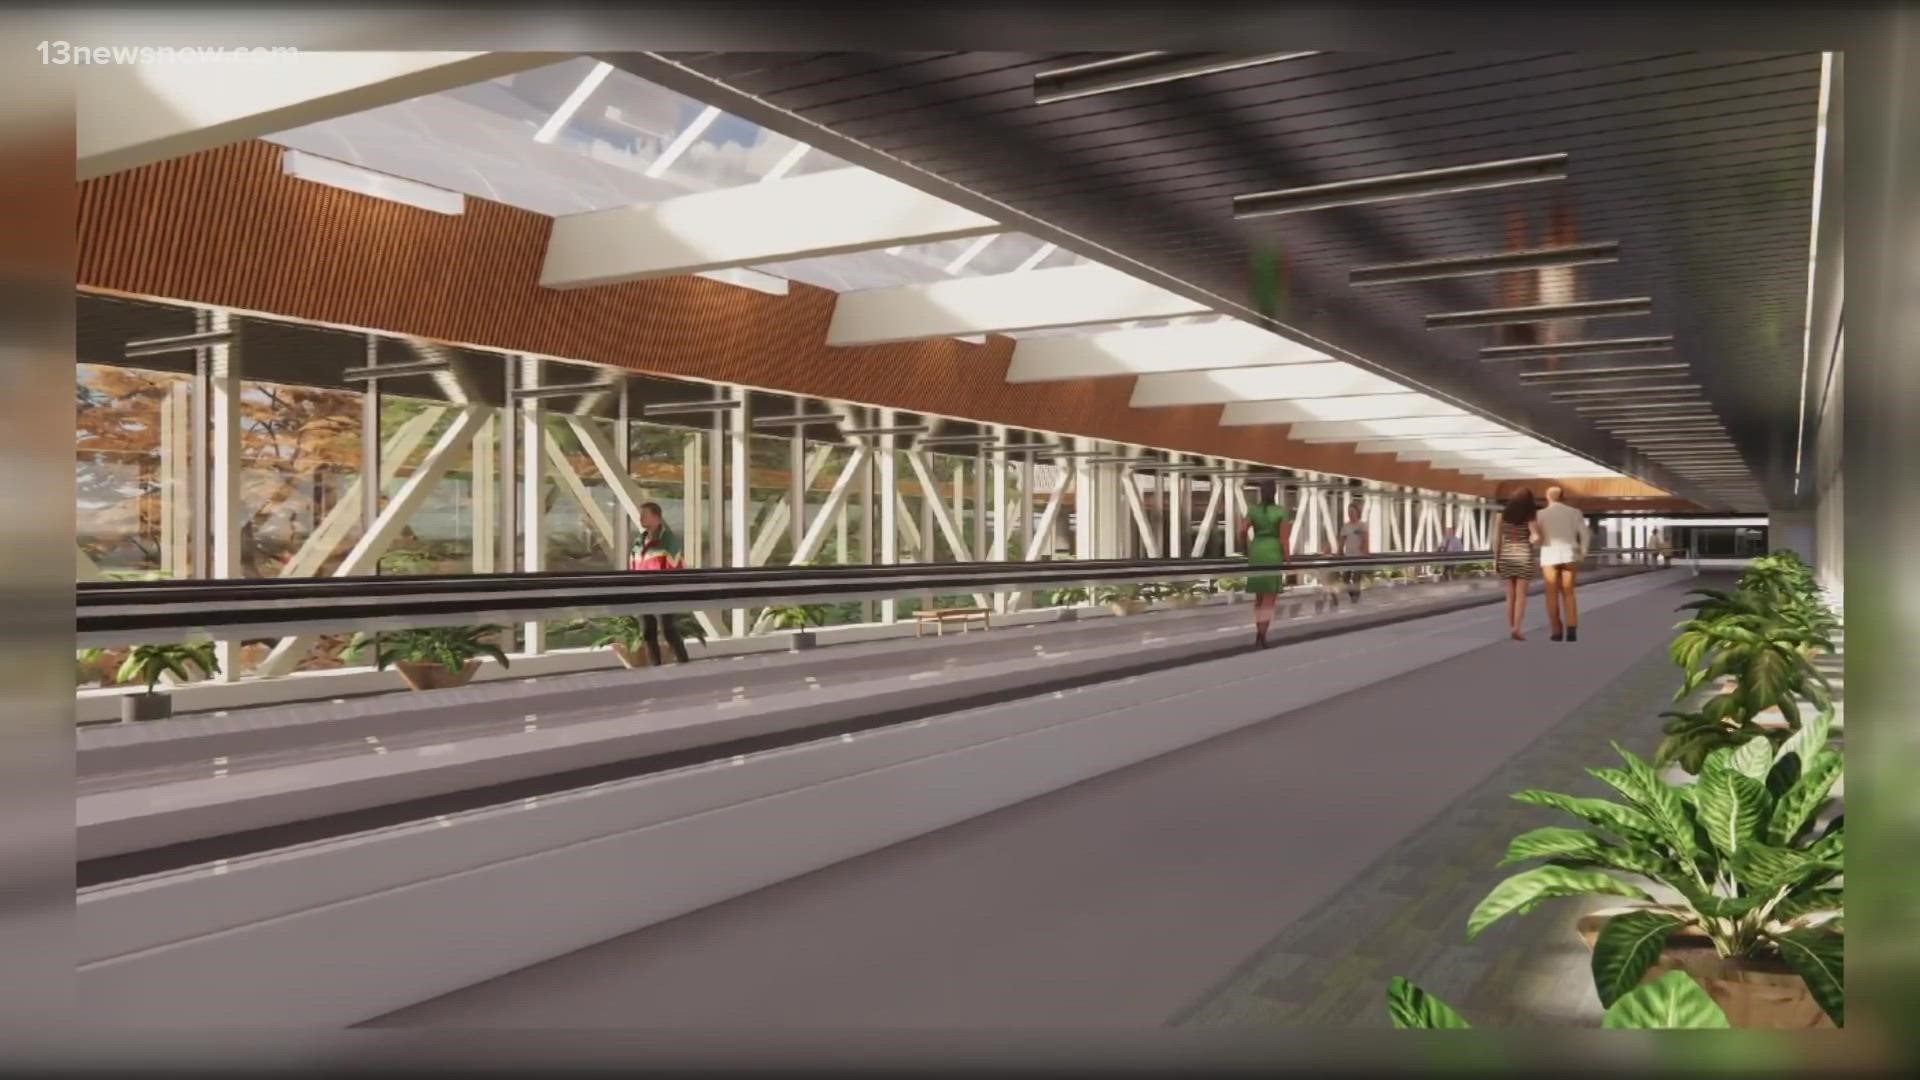 The airport received more than $5 million in federal funds to support a moving sidewalk on the pedestrian bridge.